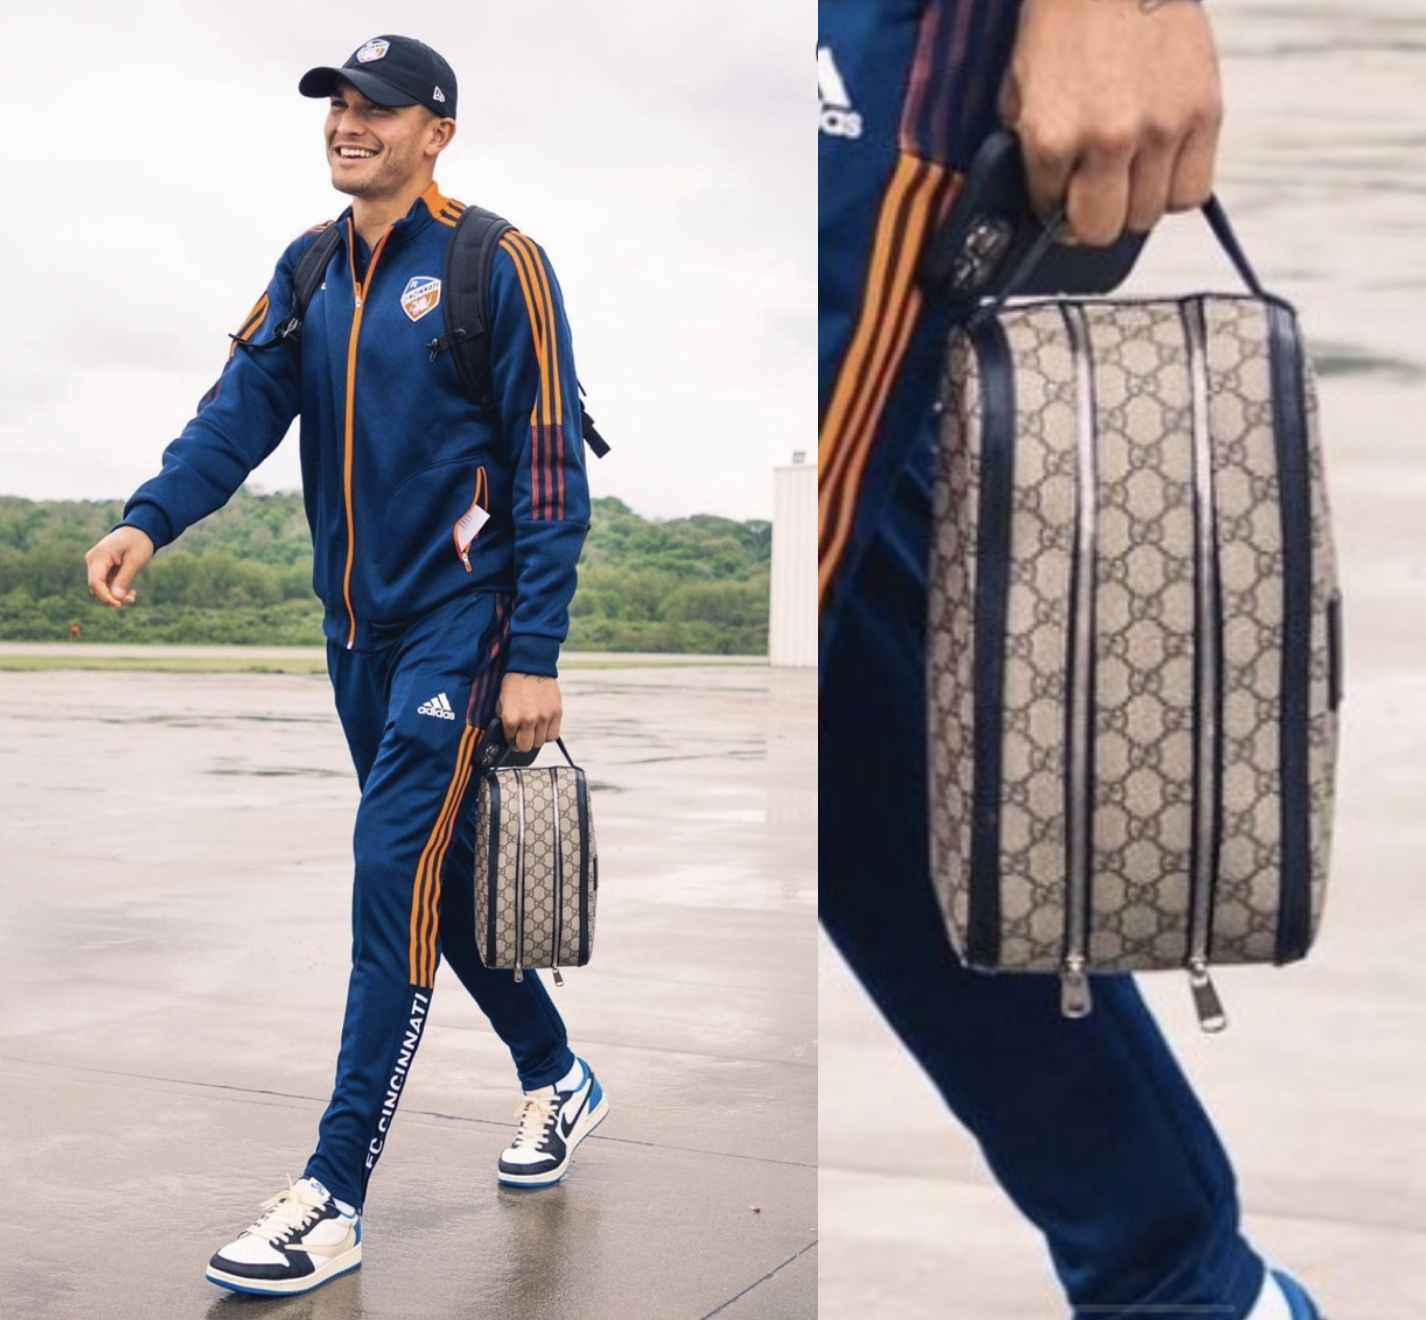 What do football (soccer) players carry in those small zip bags when they  get off the team bus? - Quora